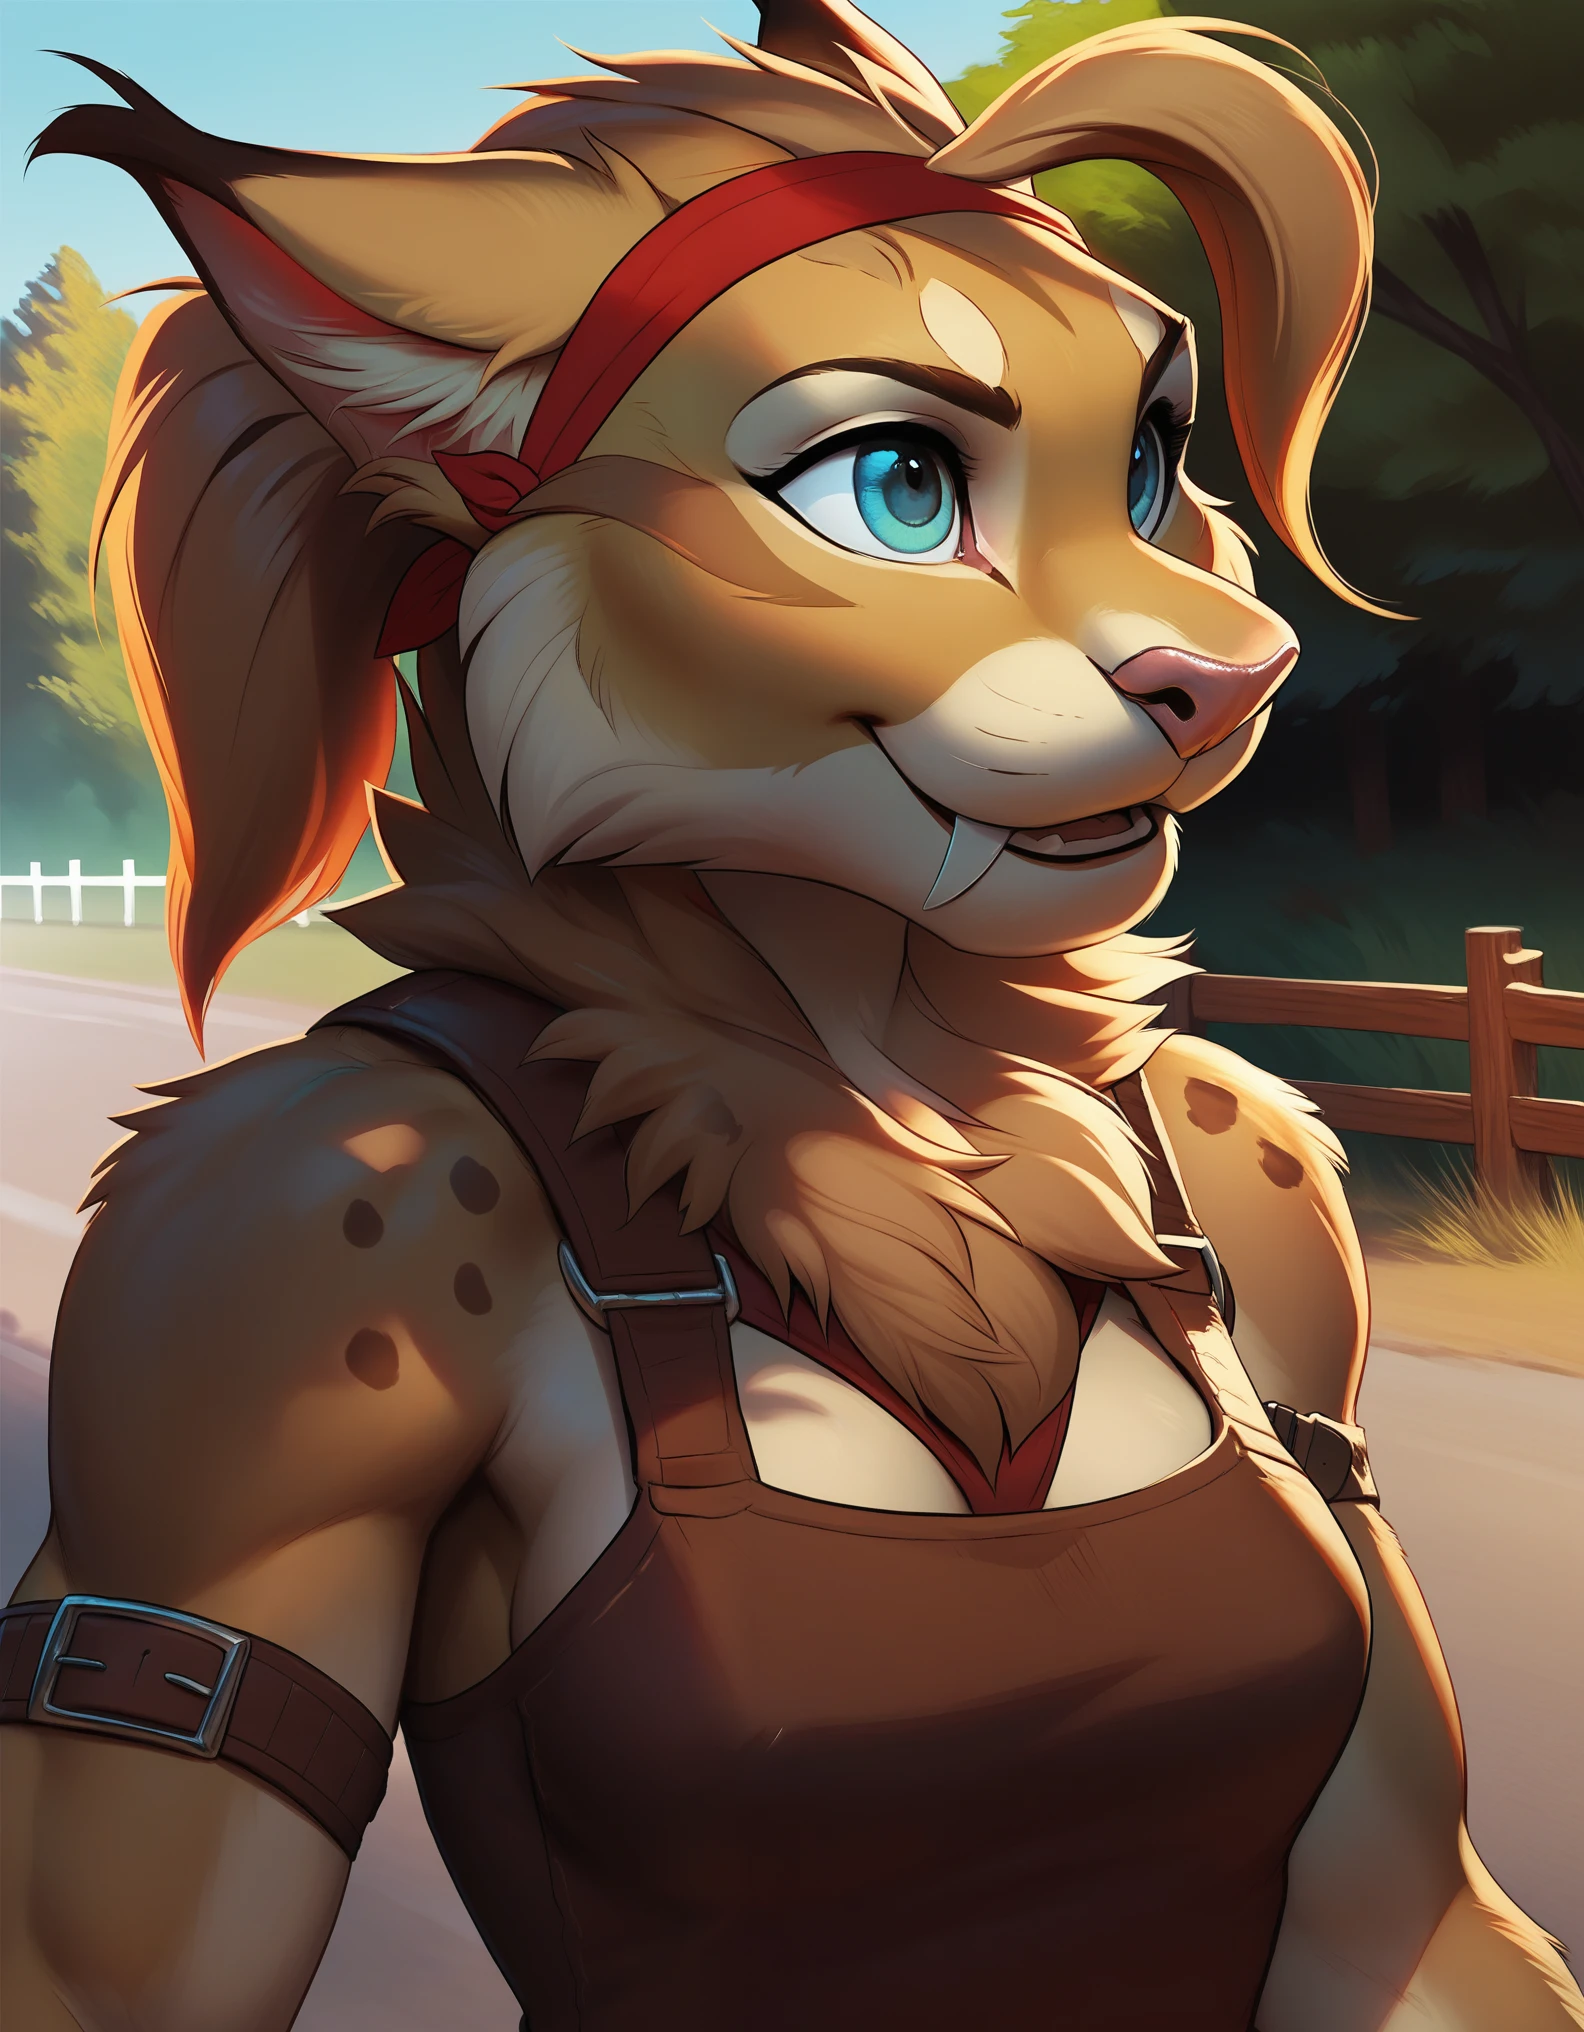 doubletroublexl, jade (kabscorner), 1girl, lynx, source_furry, realism, cowboy shot, belt across breasts, white and red shirt, headshot, upper body, face focus, solo, pulling on headband, female focus, happy, tan fur, red headband, short blond hair with fringe, white and red tank top, brown leather boob strap, thigh and arm straps, green outdoors background with trees and a wooden fence fence, clearing, road, building, detailed fur, score_9, score_8_up, score_7_up,